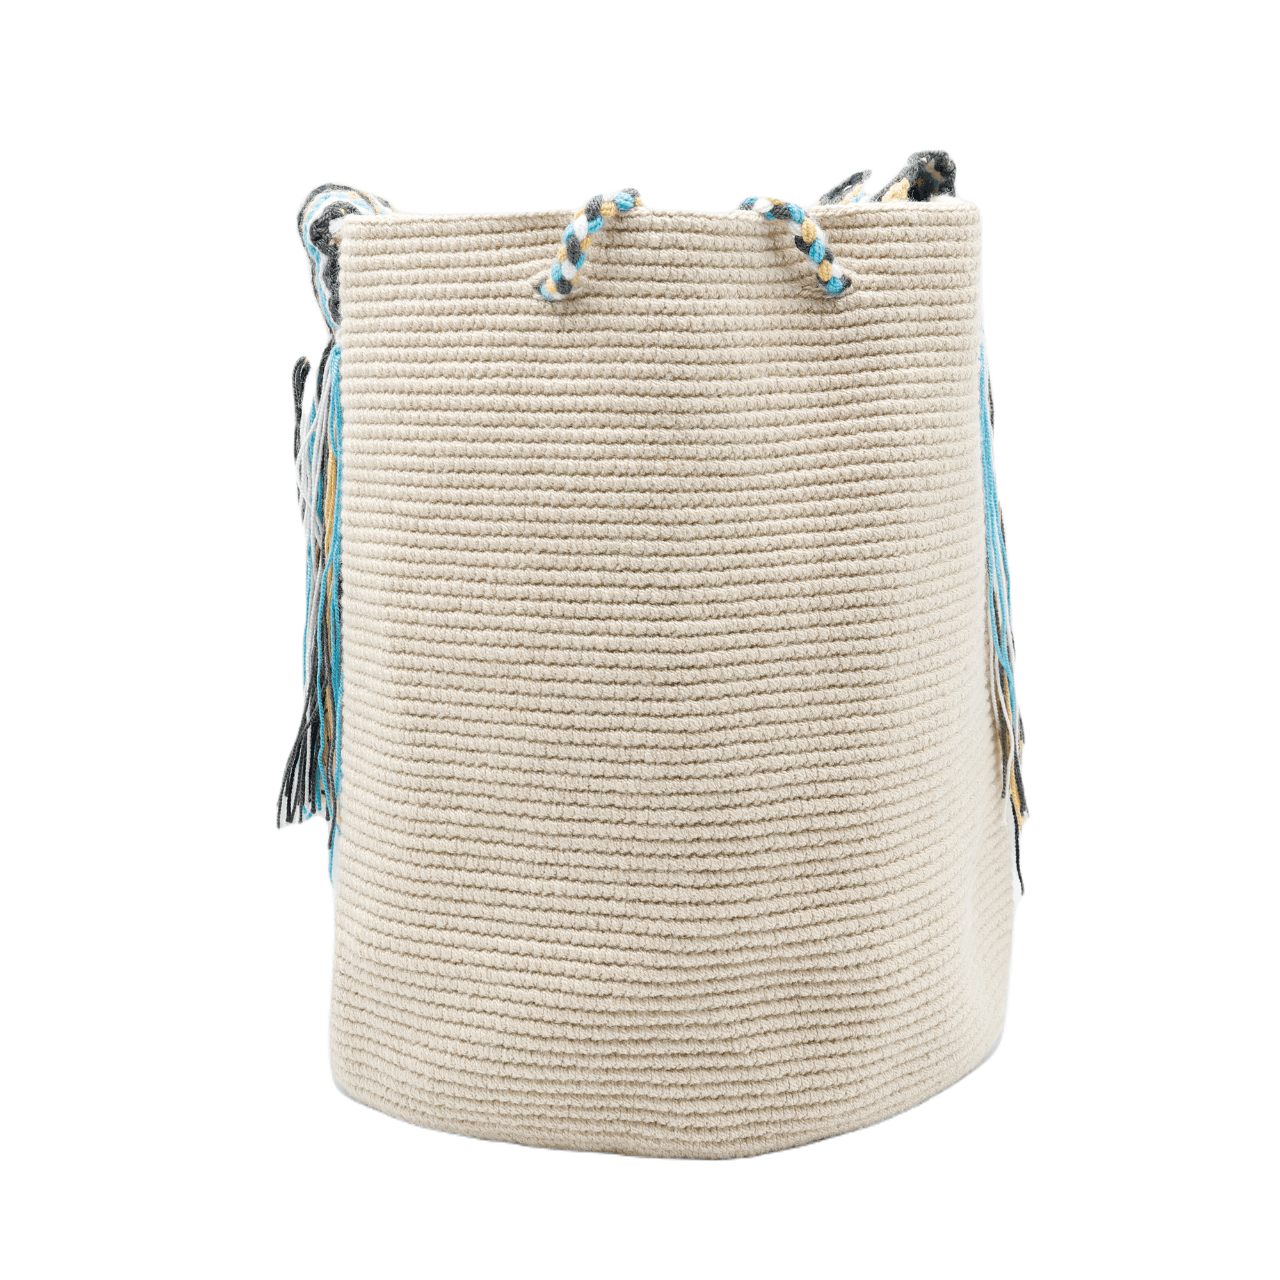 Luisa Wayuu Bag in beige color with a stunning macrame shoulder strap, showcasing exquisite craftsmanship and unique style